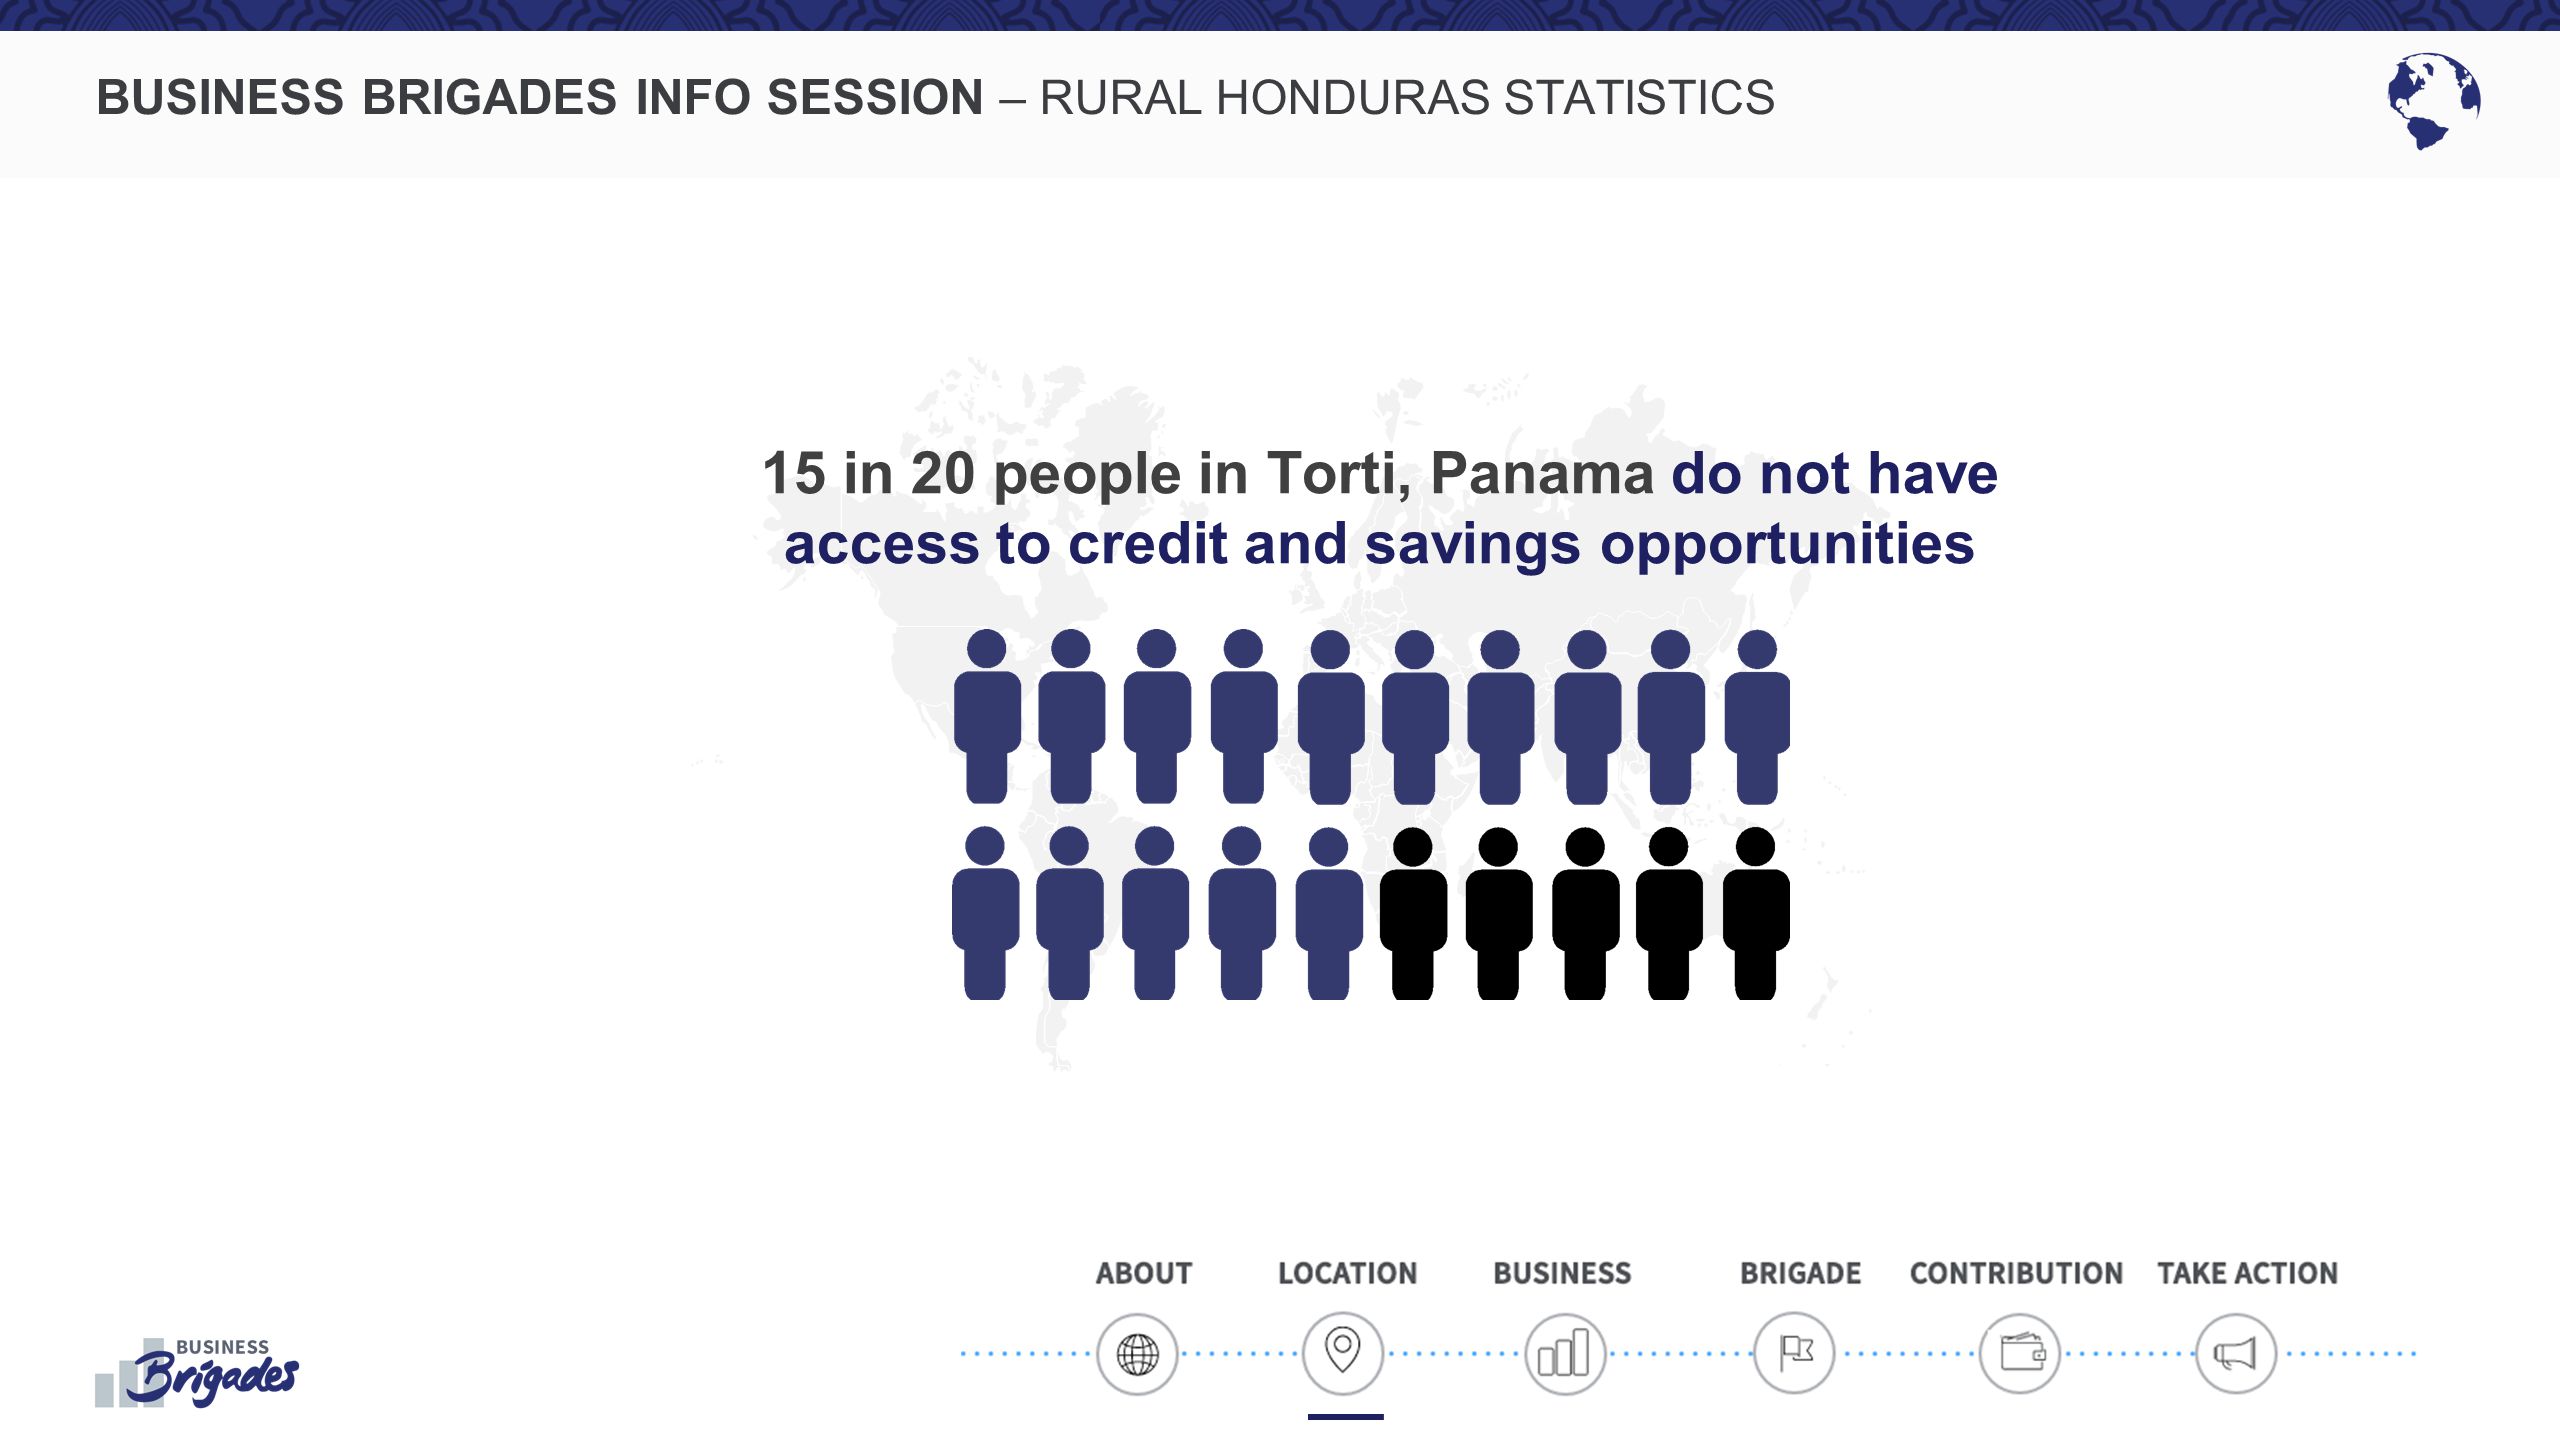 BUSINESS BRIGADES INFO SESSION – RURAL HONDURAS STATISTICS 15 in 20 people in Torti, Panama do not have access to credit and savings opportunities